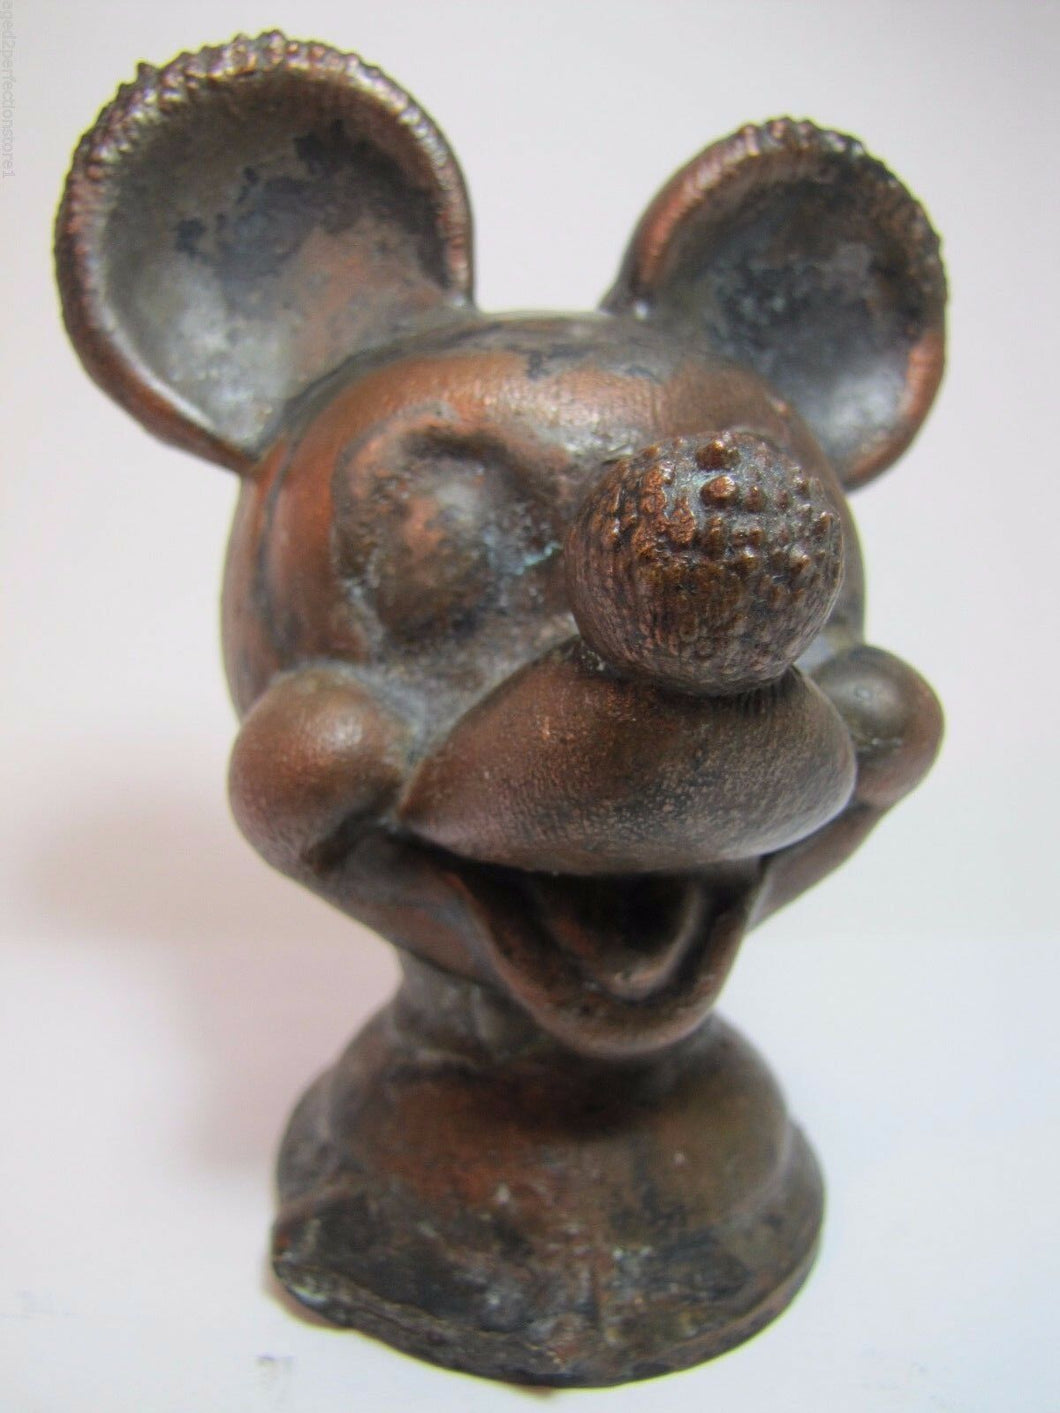 Orig MICKEY MOUSE WALT DISNEY Toy Mold rare WDP marked metal figural head mld